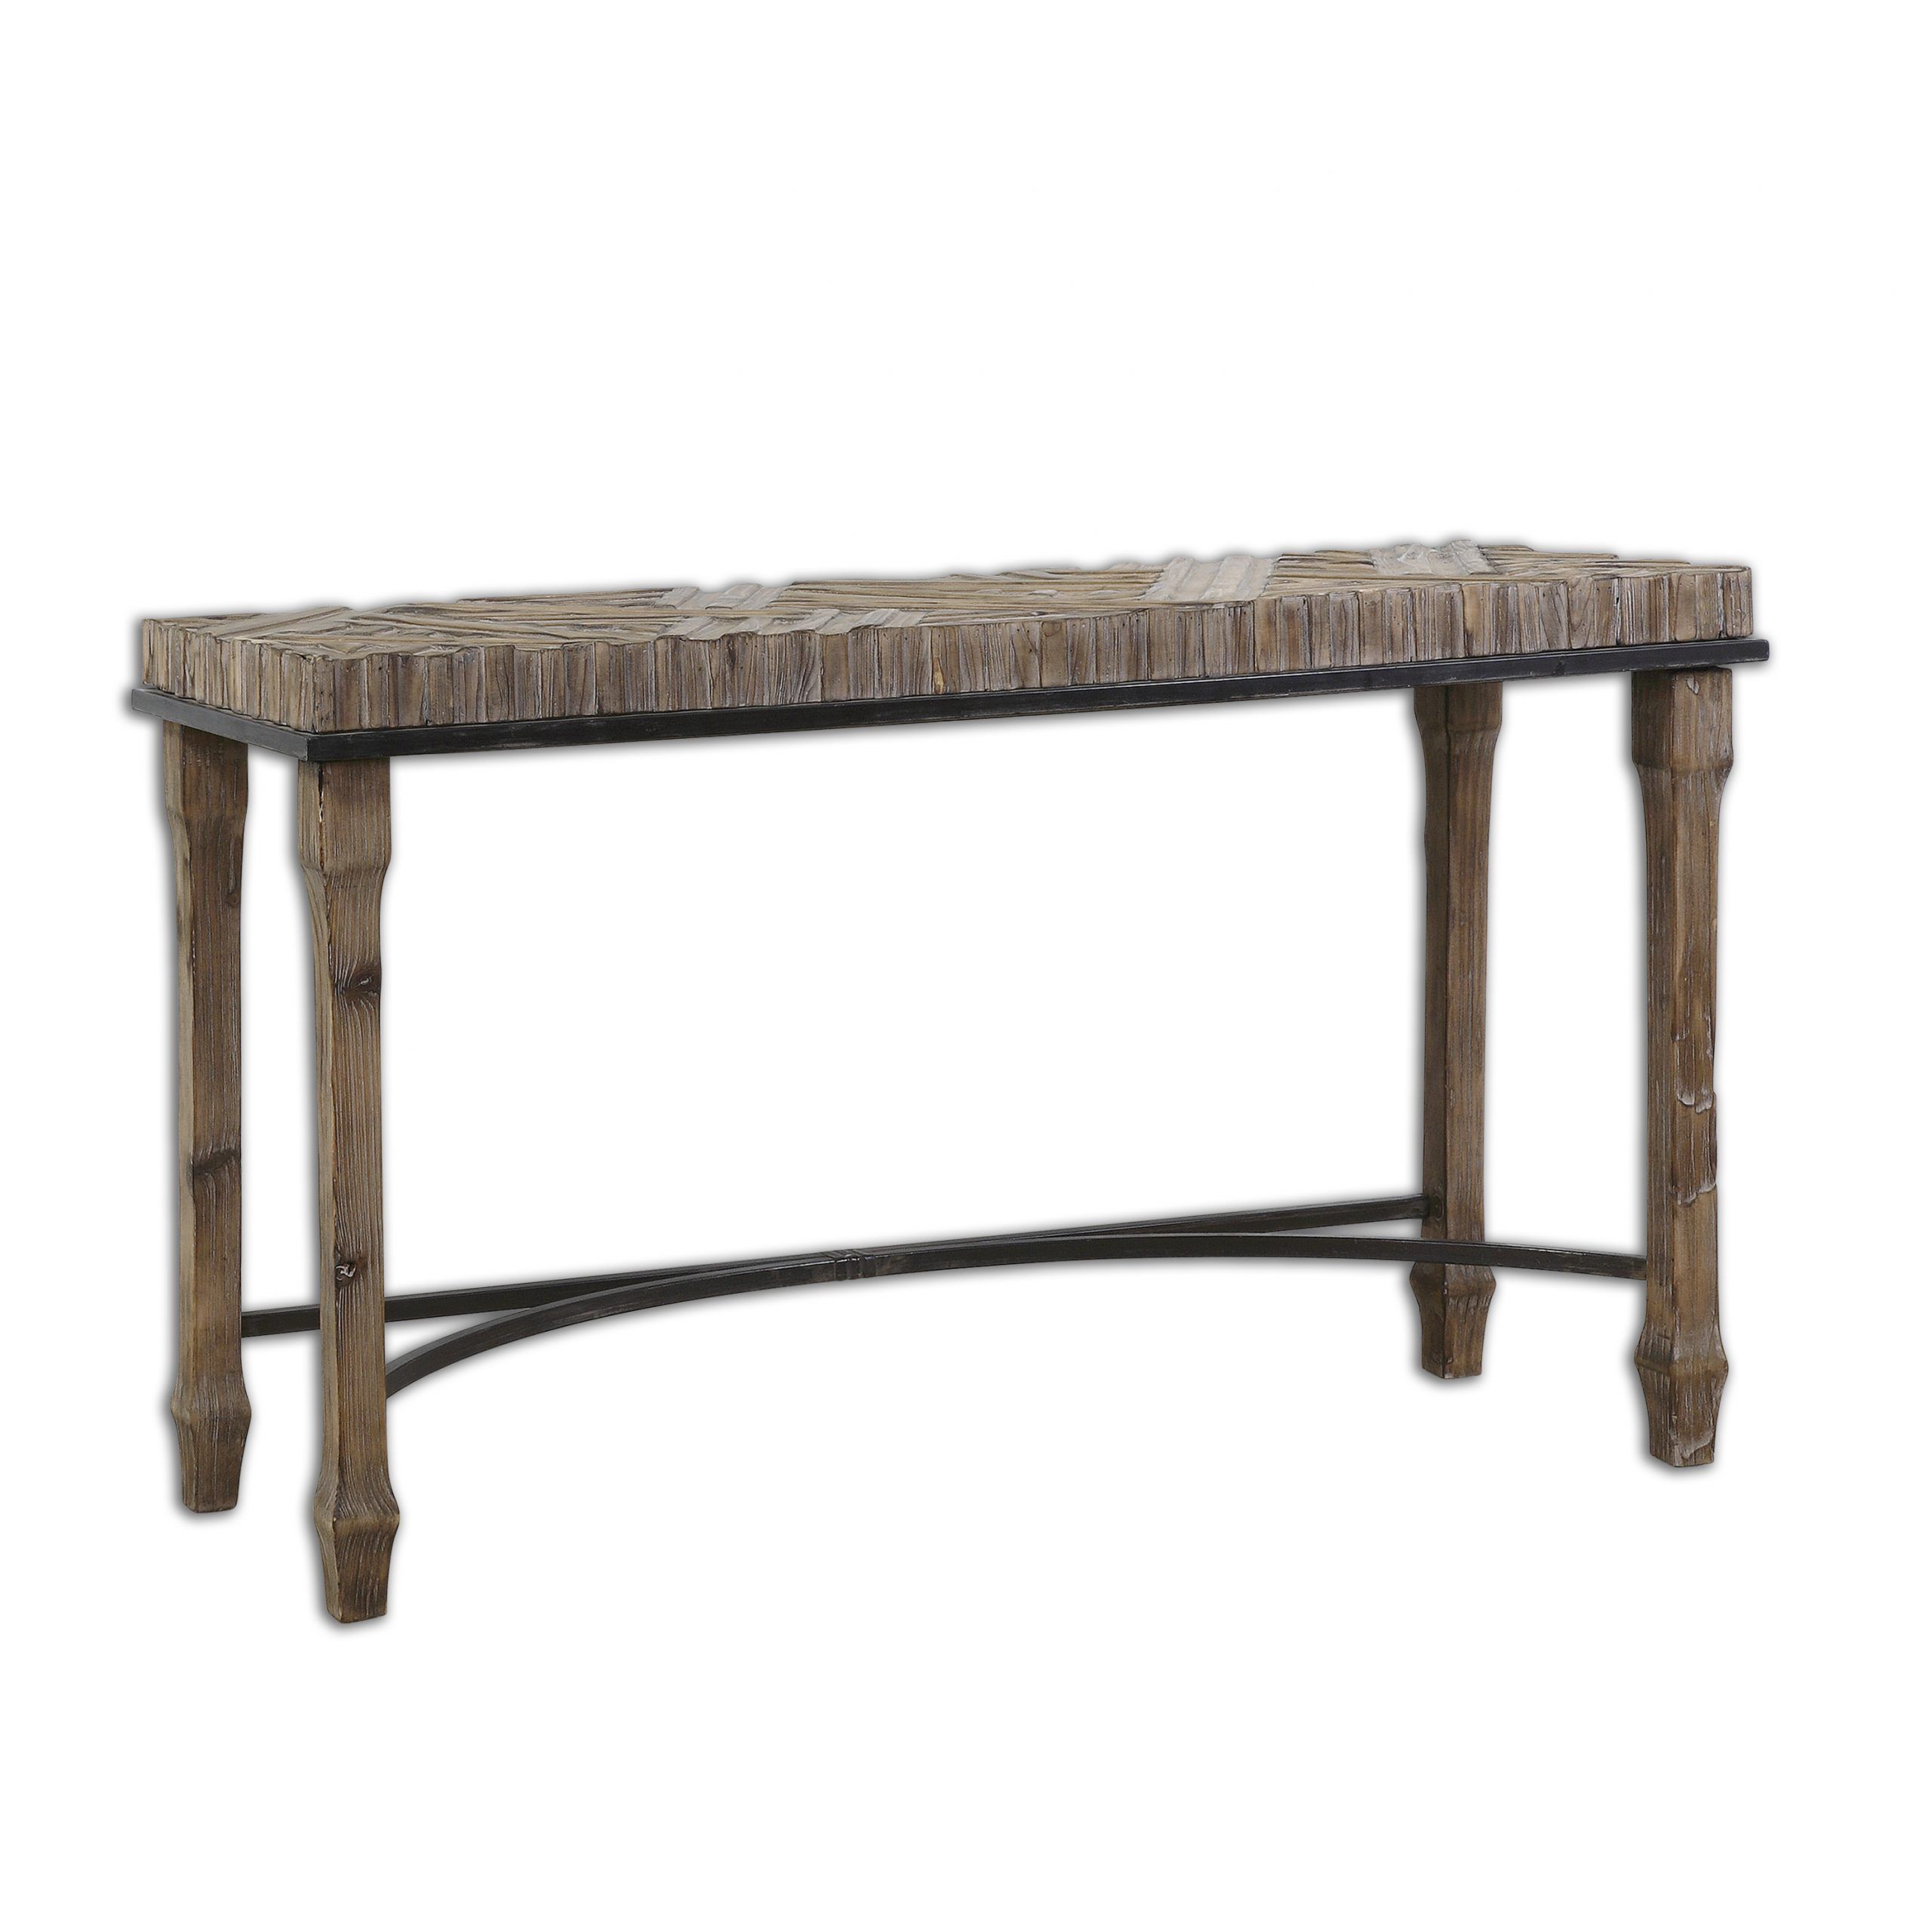 55" Agana Weathered Fir Wood & Black Metal Accent Sofa Console Table With Regard To Metal Console Tables (View 4 of 20)